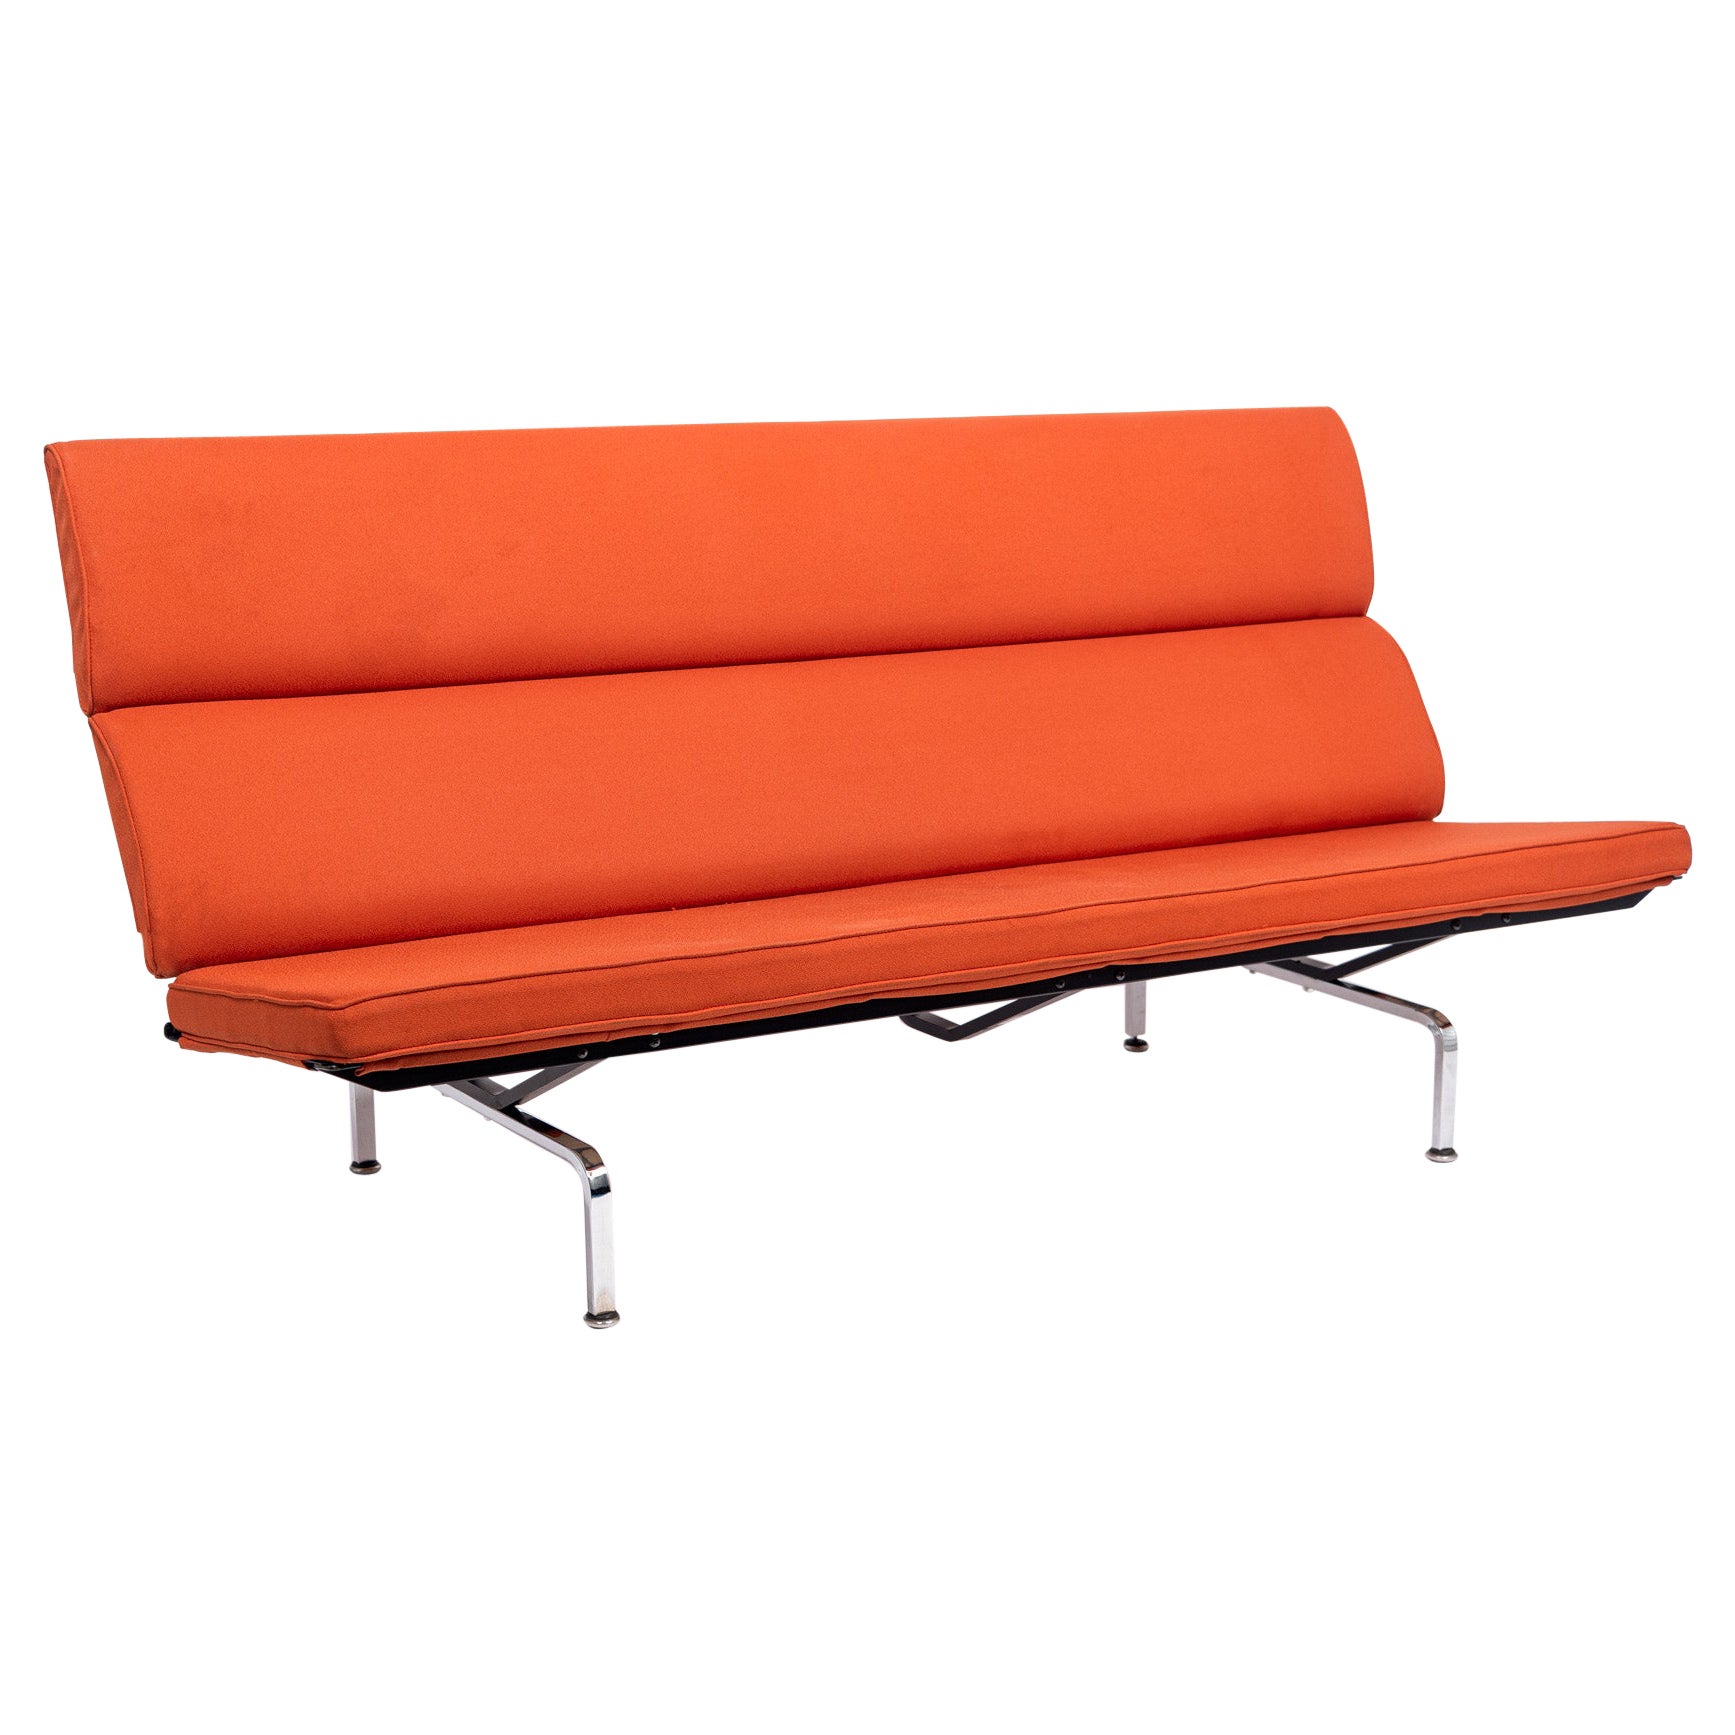 1970s Midcentury Orange Sofa Compact by Charles & Ray Eames for Herman Miller